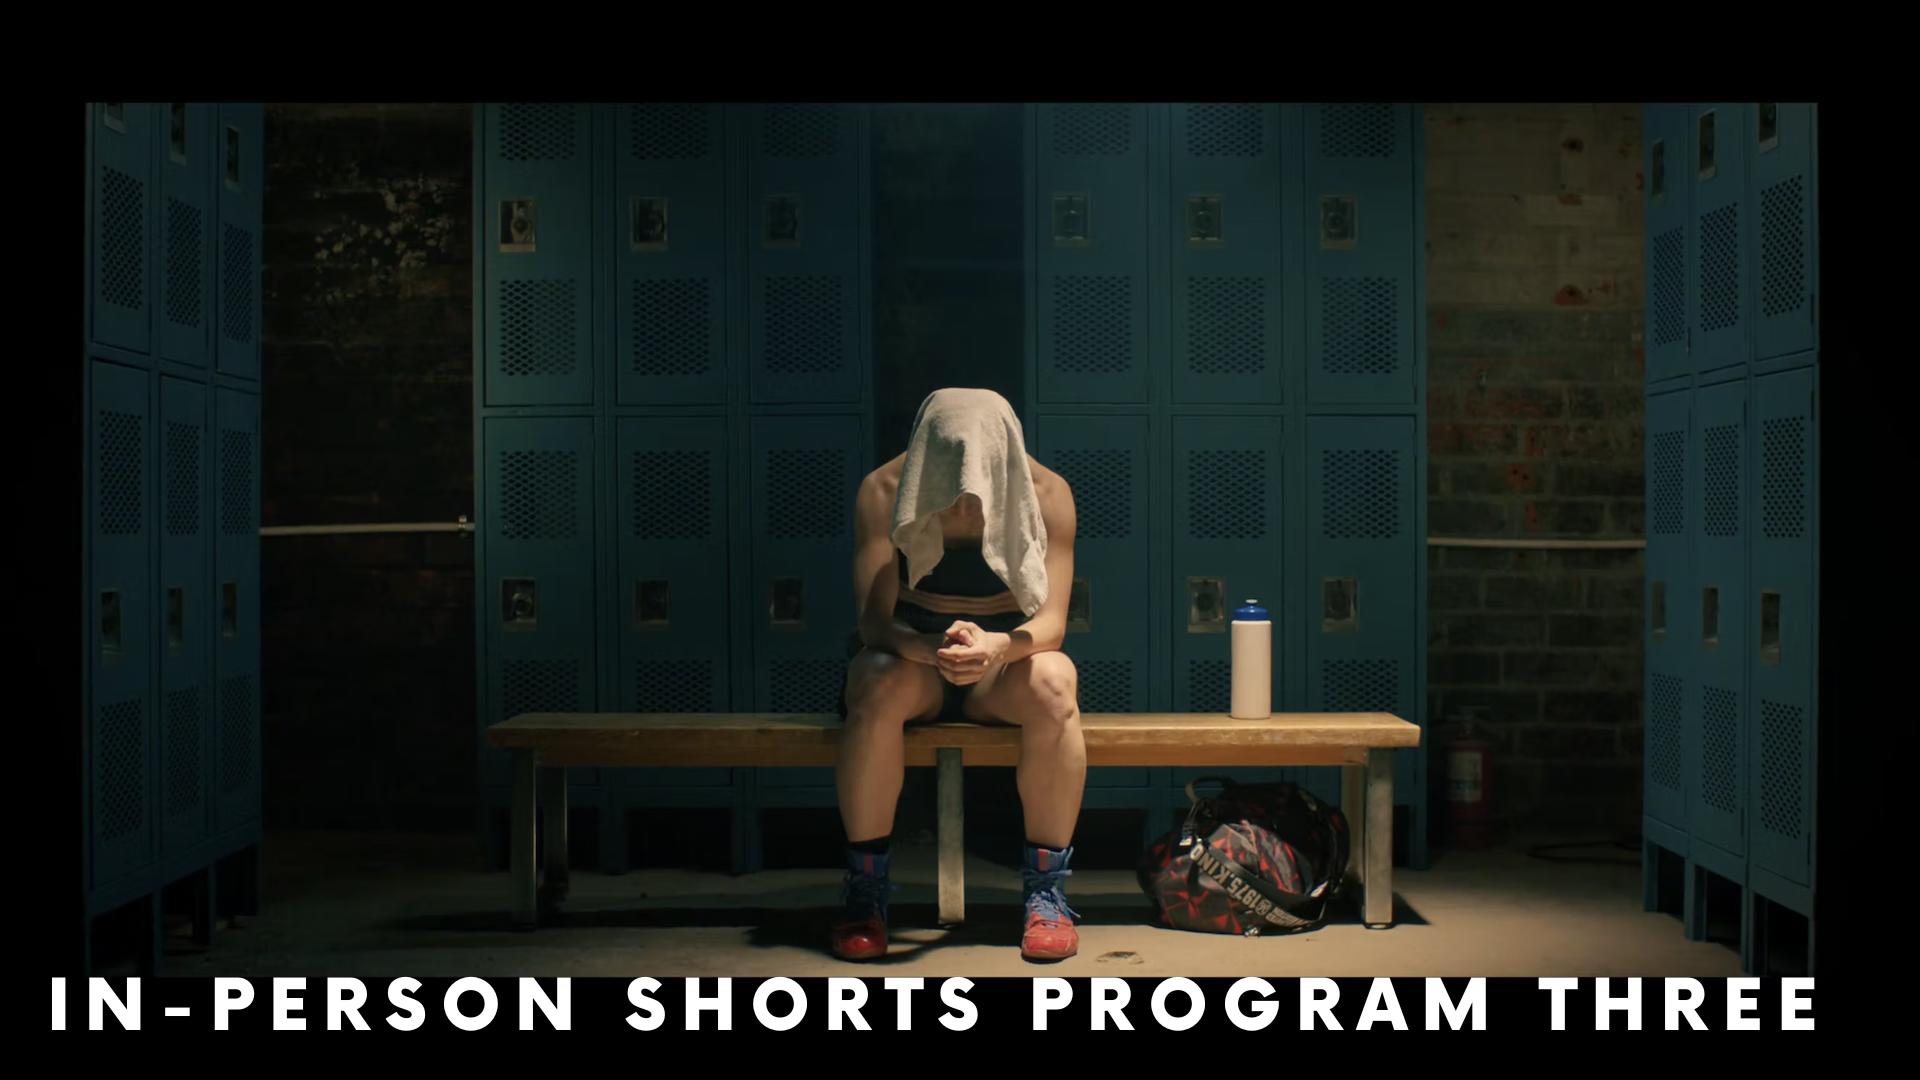 In-Person Shorts Program 3